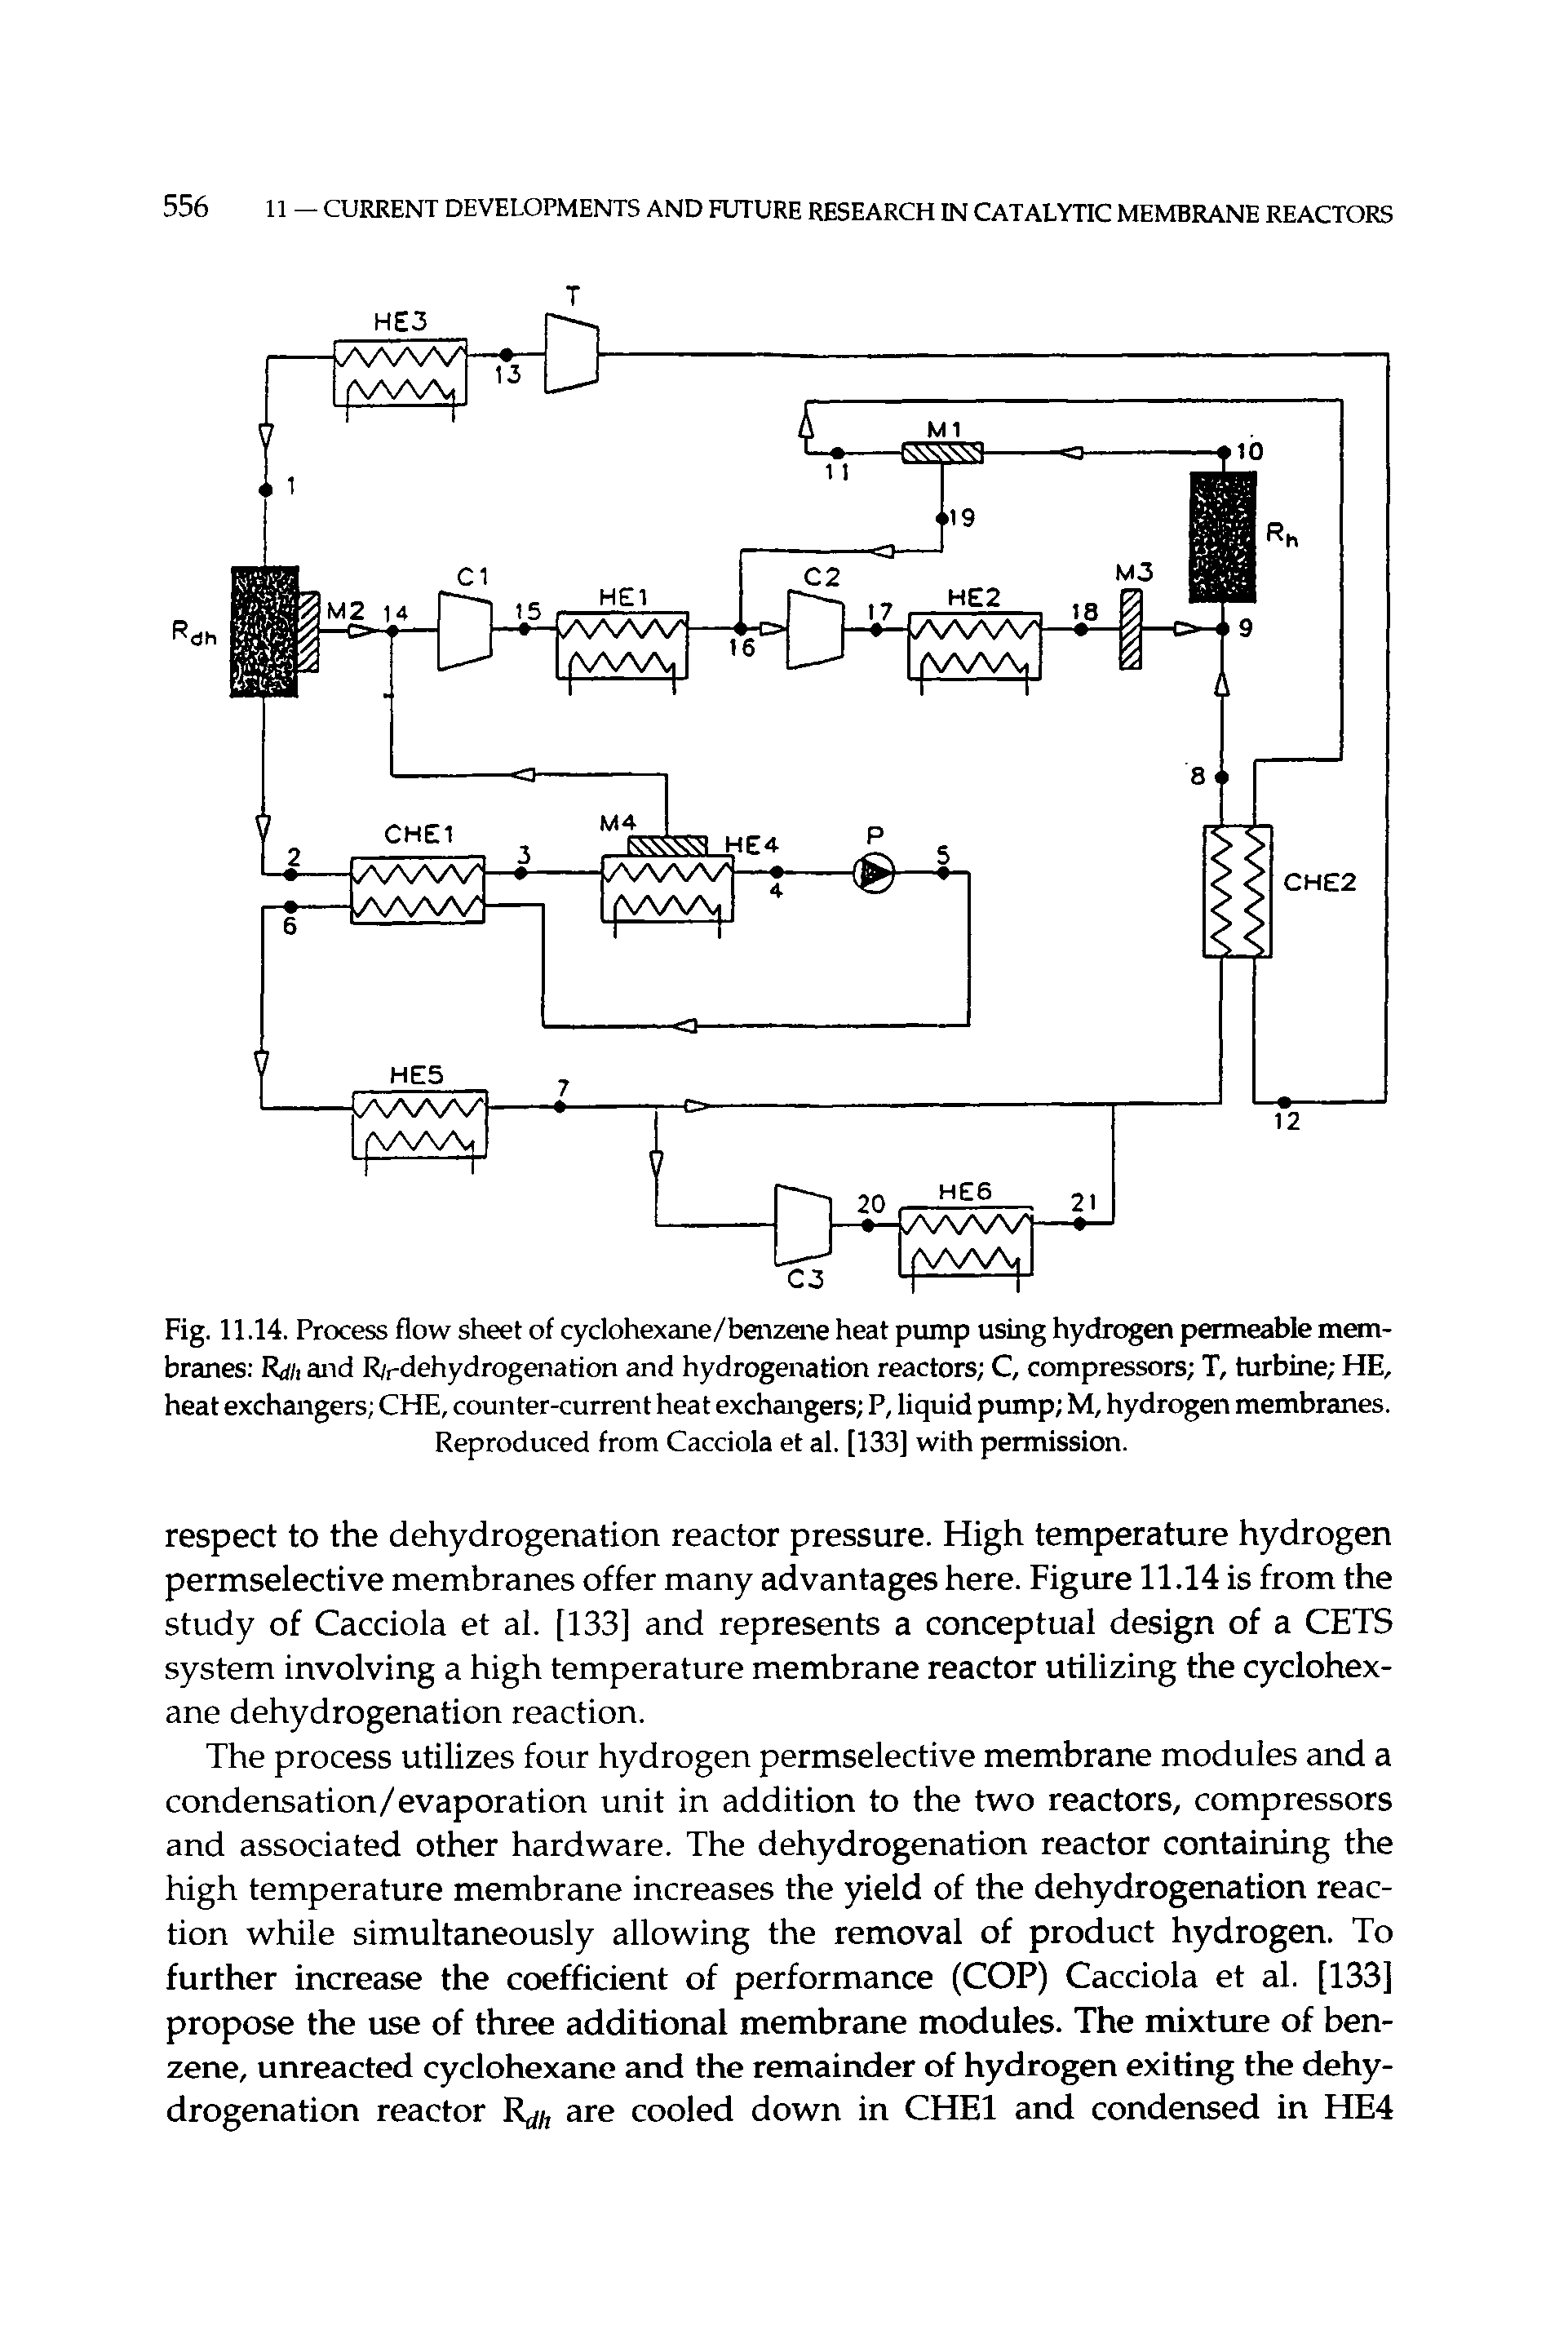 Fig. 11.14. Process flow sheet of cyclohexane/benzene heat pump using hydrogen permeable membranes Rdit and R/rdehydrogenation and hydrogenation reactors C, compressors T, turbine HE, heat exchangers CHE, counter-current heat exchangers P, liquid pump M, hydrogen membranes. Reproduced from Cacciola et al. [133] with permission.